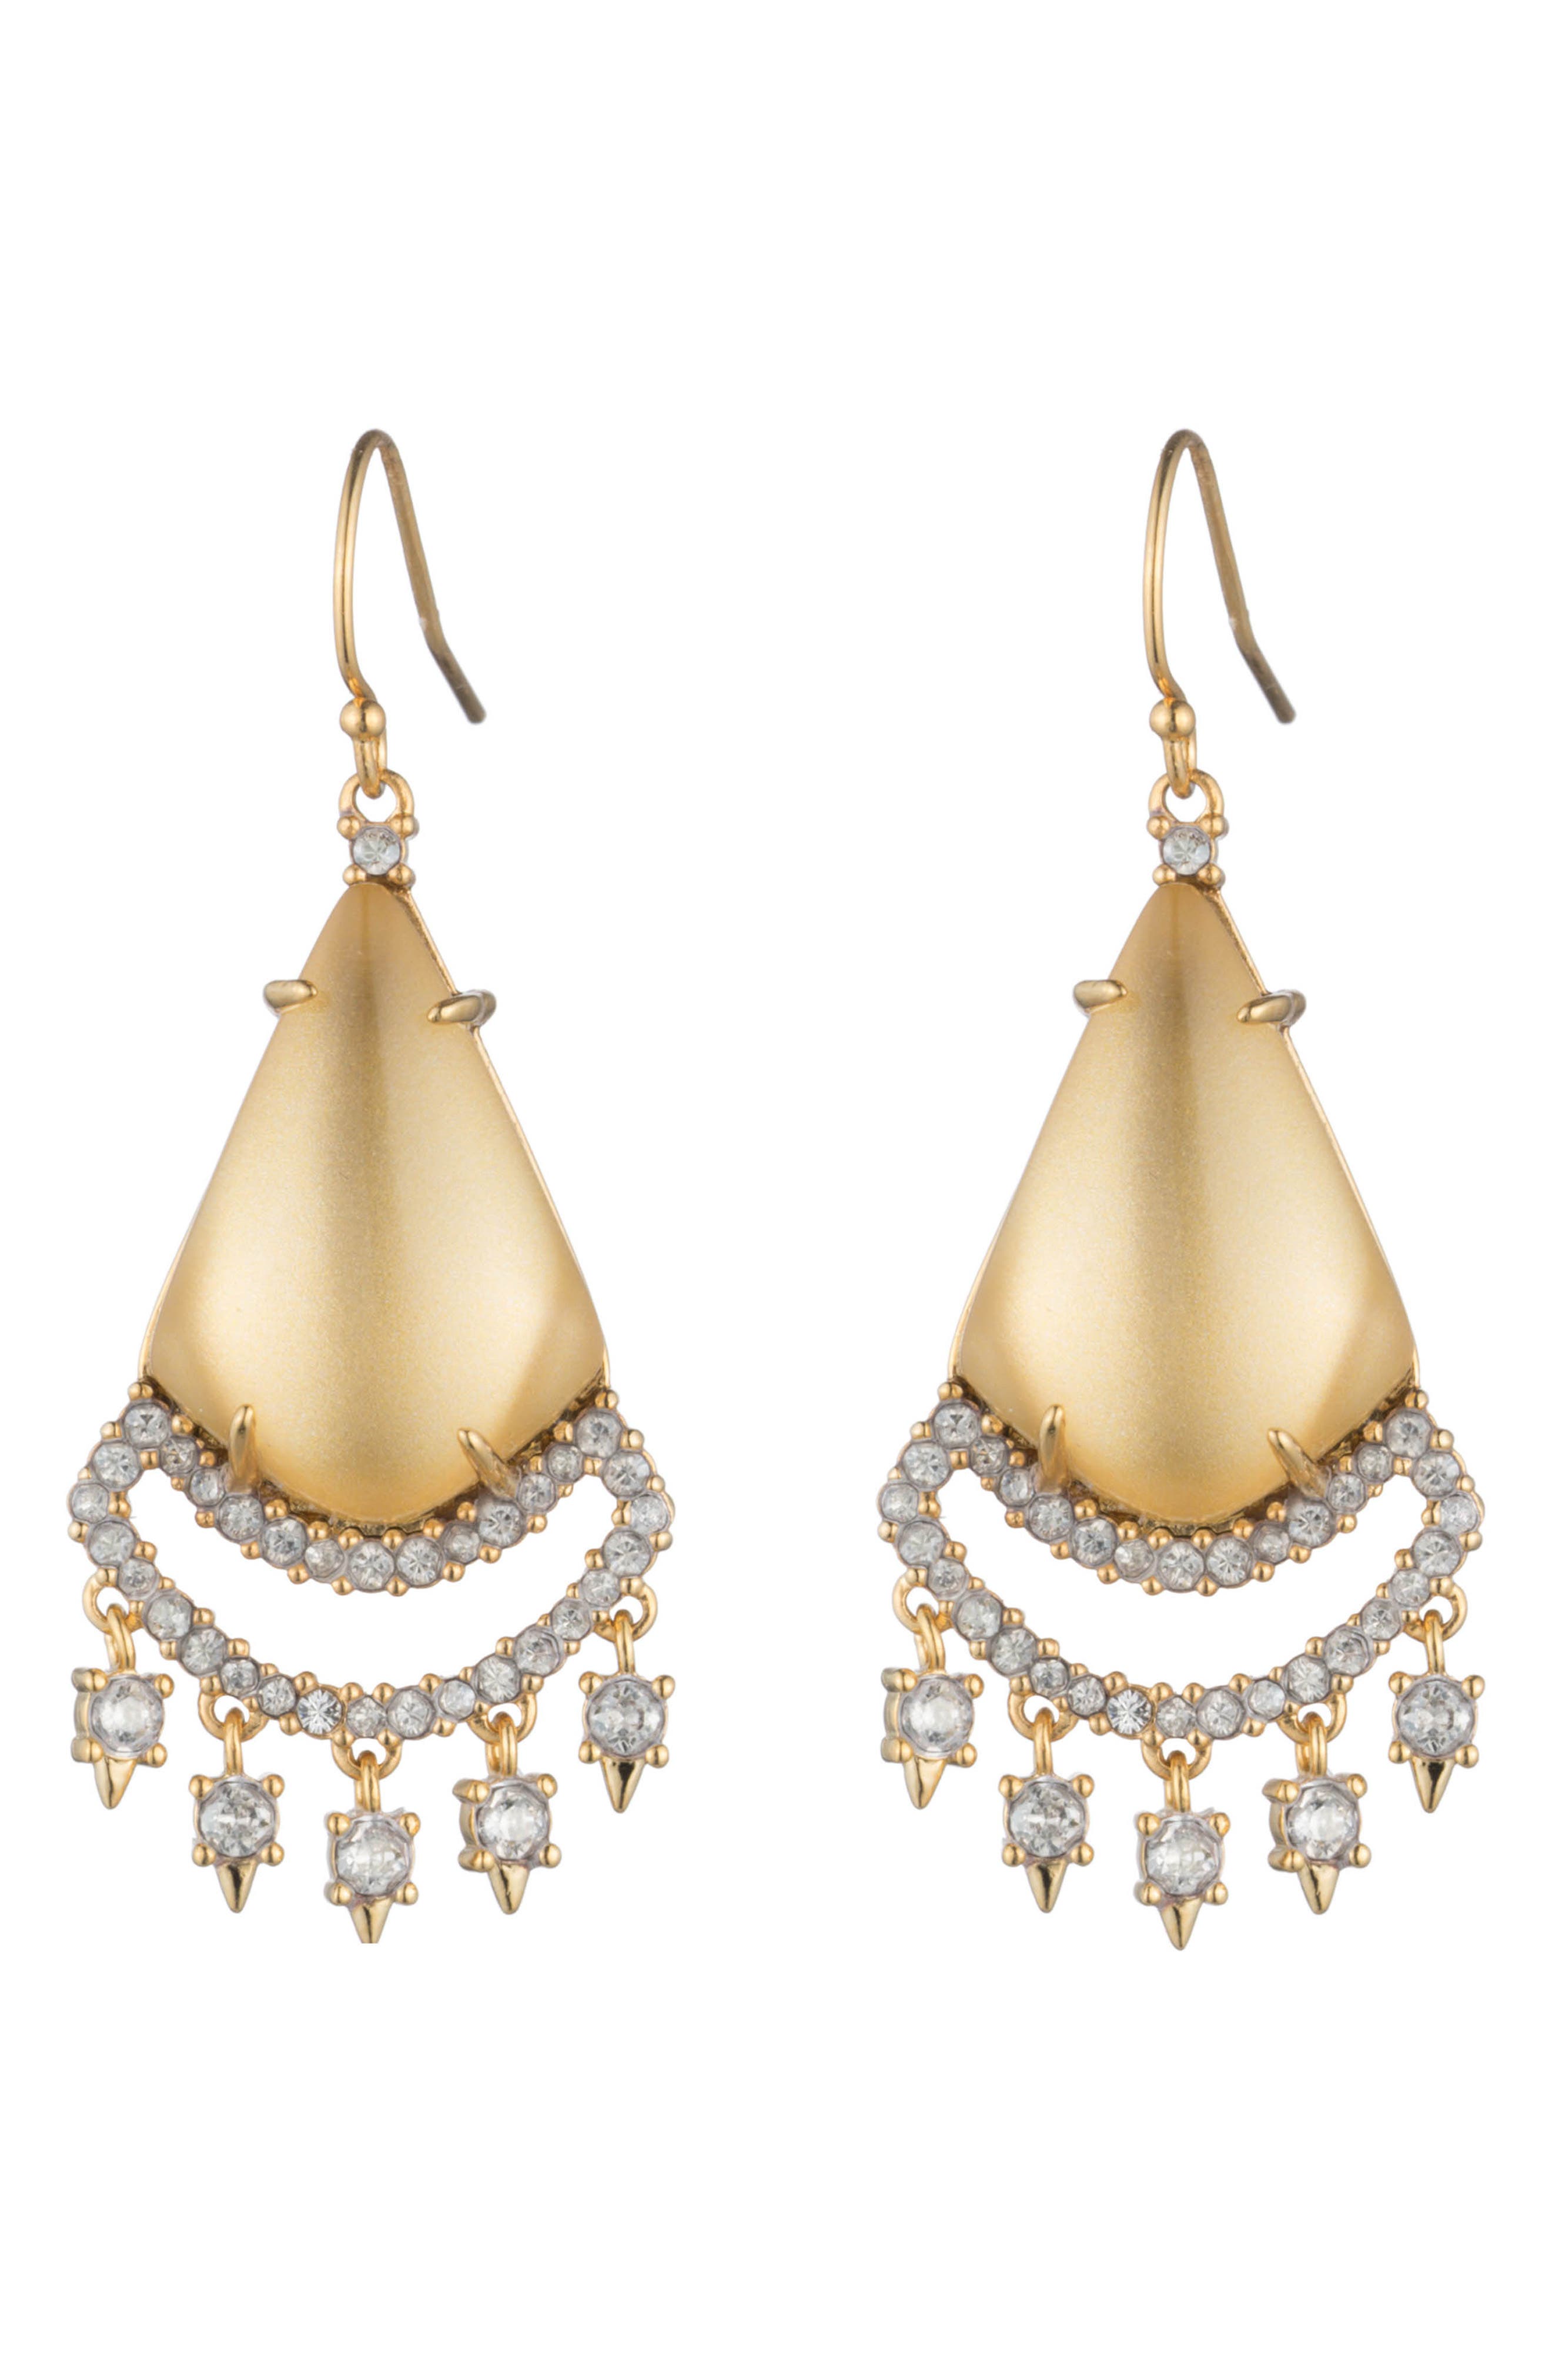 Alexis Bittar 10k Gold Plated Lucite Crystal Drop Earrings